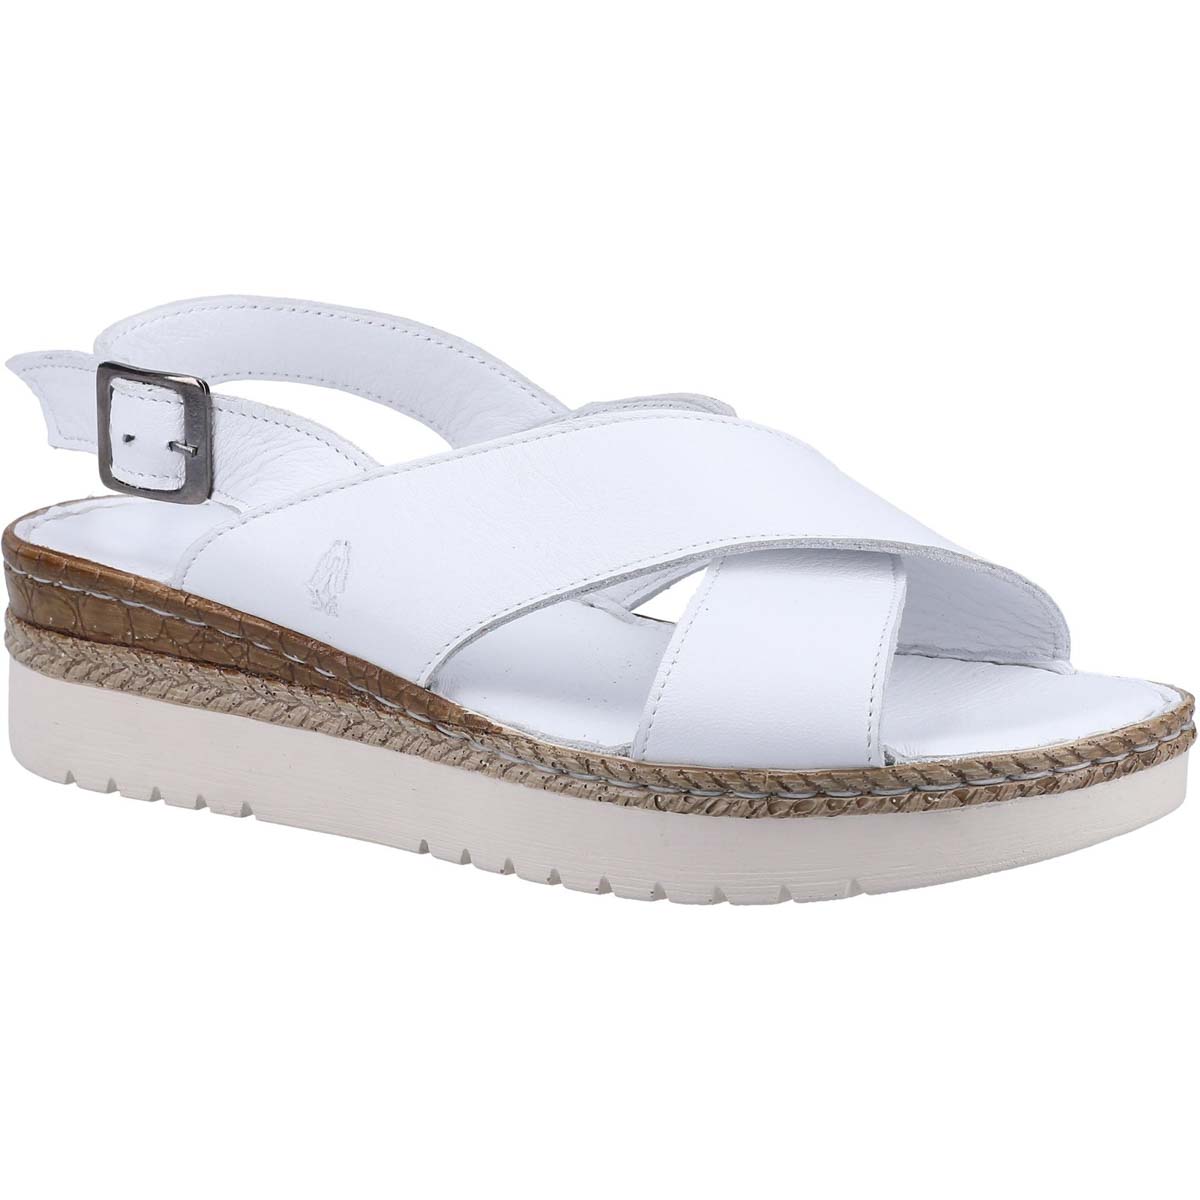 Hush Puppies Saphira White Womens Comfortable Sandals 36627-68325 in a Plain Leather in Size 5